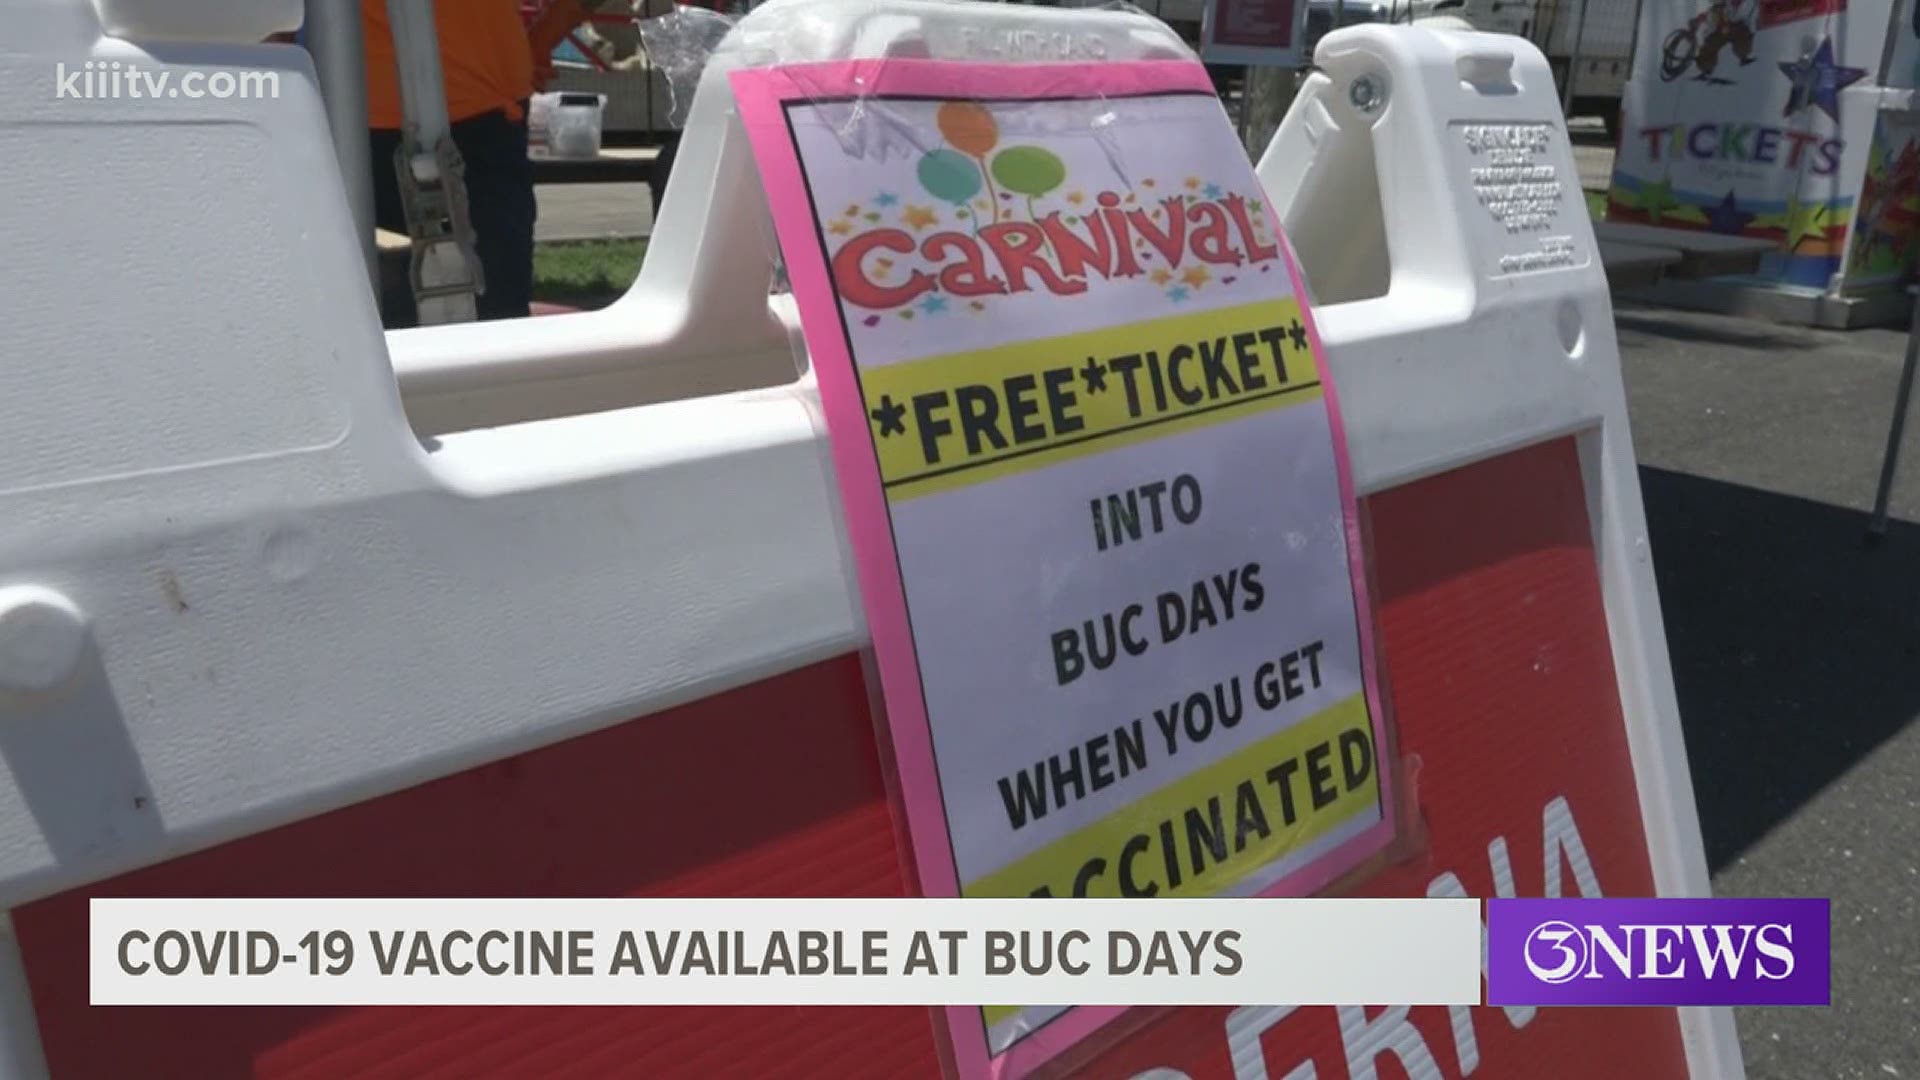 If you get your vaccine, you can get into Buc Days free.